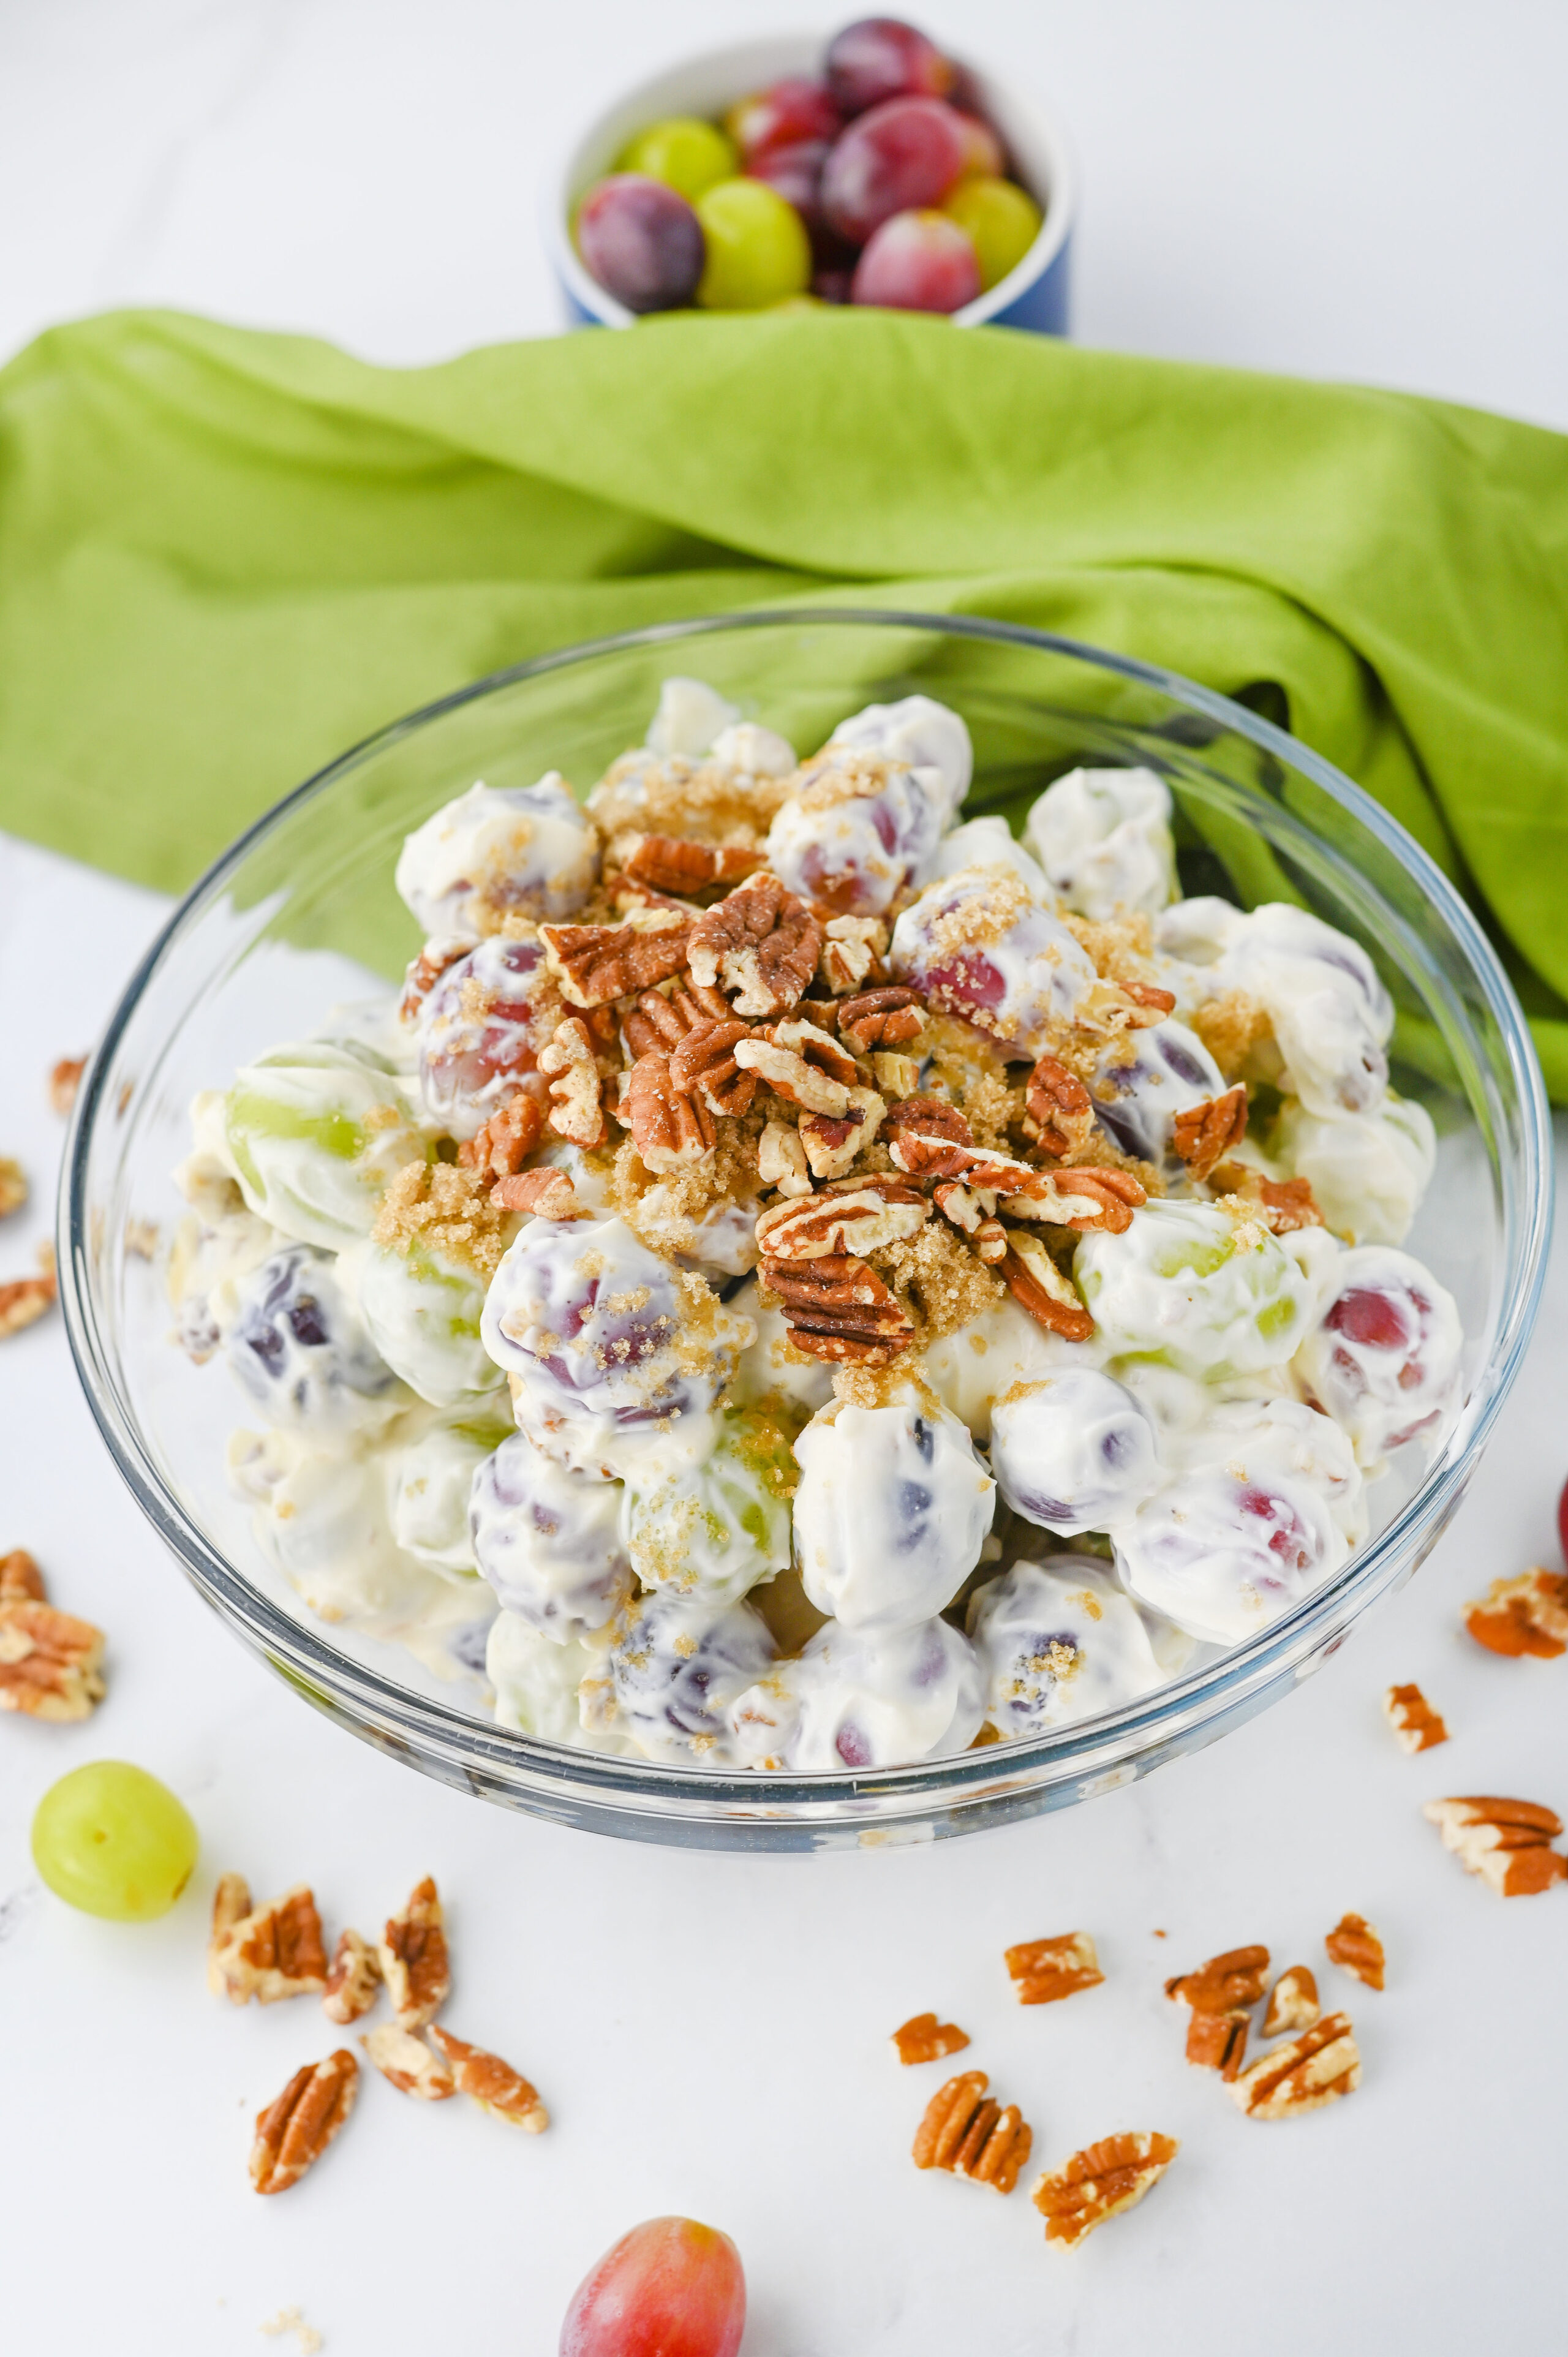 grape salad topped with crunchy nuts and brown sugar in a glass bowl.